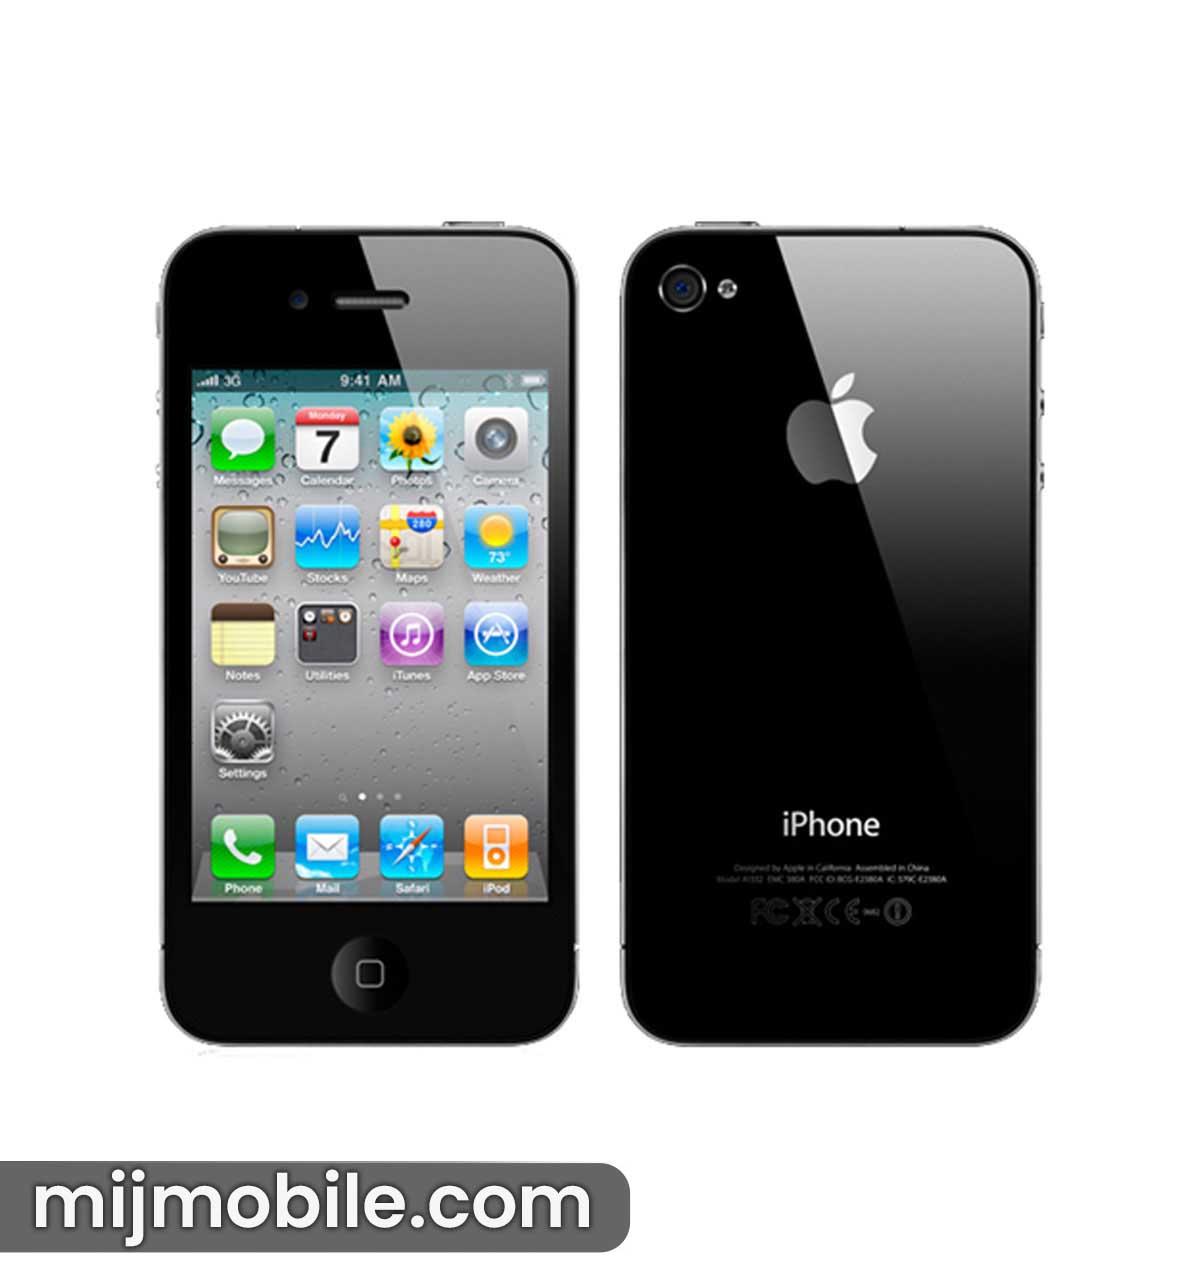 Apple iPhone 4 Price in Pakistan & Specifications. Apple iPhone 4 Price in Pakistan is only 19,999.